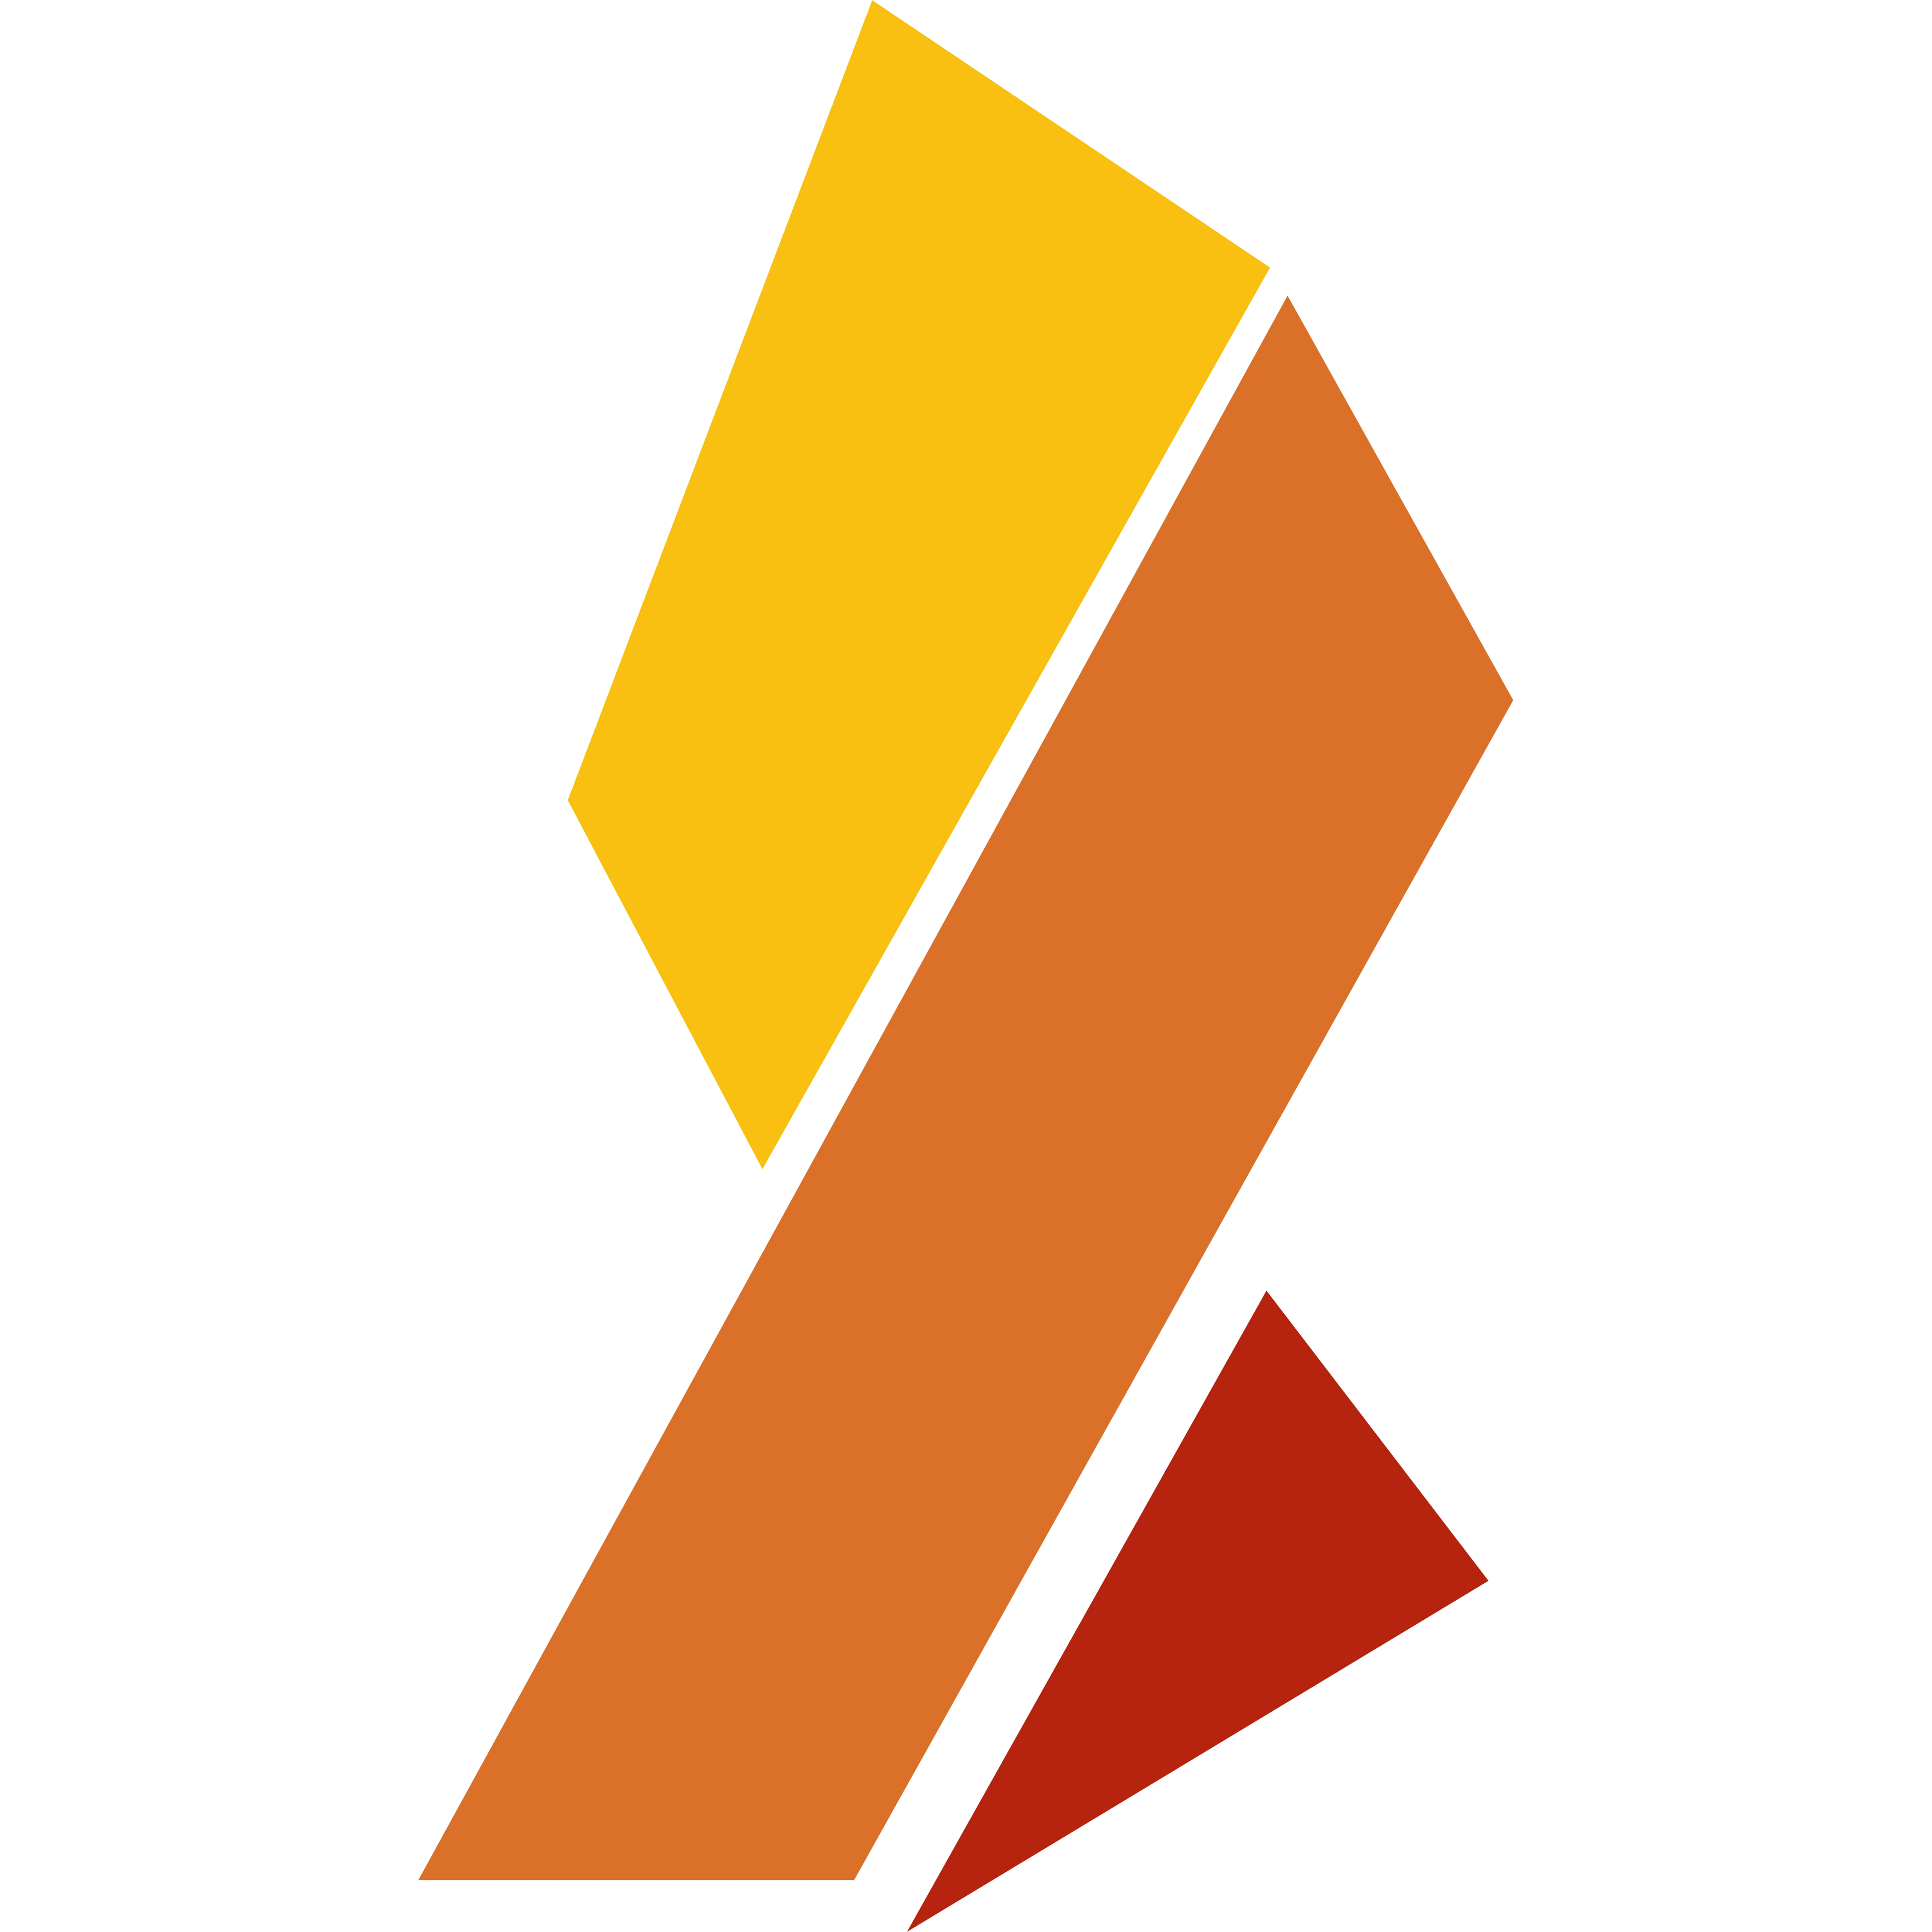 Ignis logo in png format